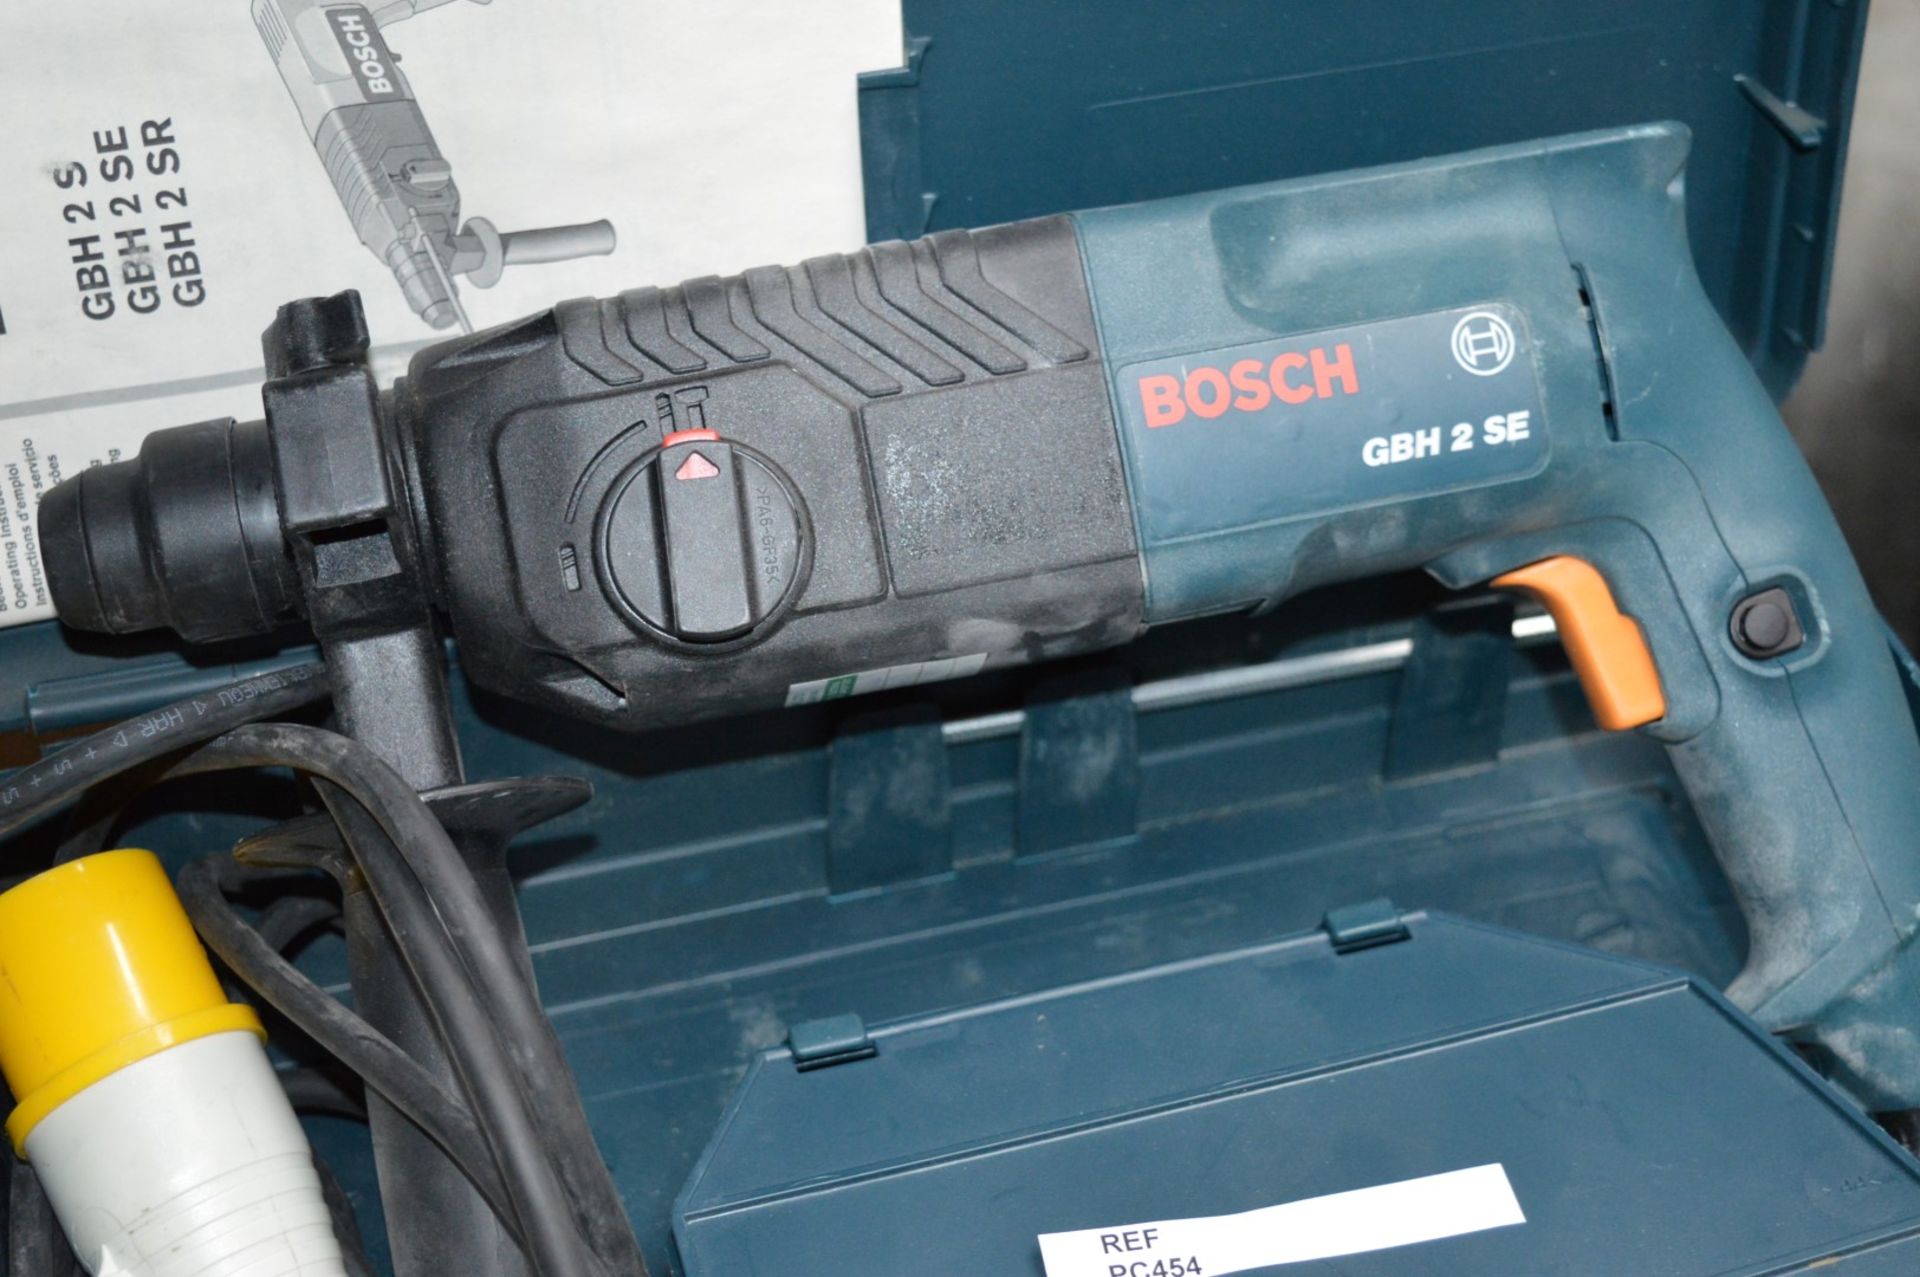 1 x Bosch Rotary Hammer Drill - 110v - Model GBH2SE - Includes Protective Case - Tested and - Image 4 of 4